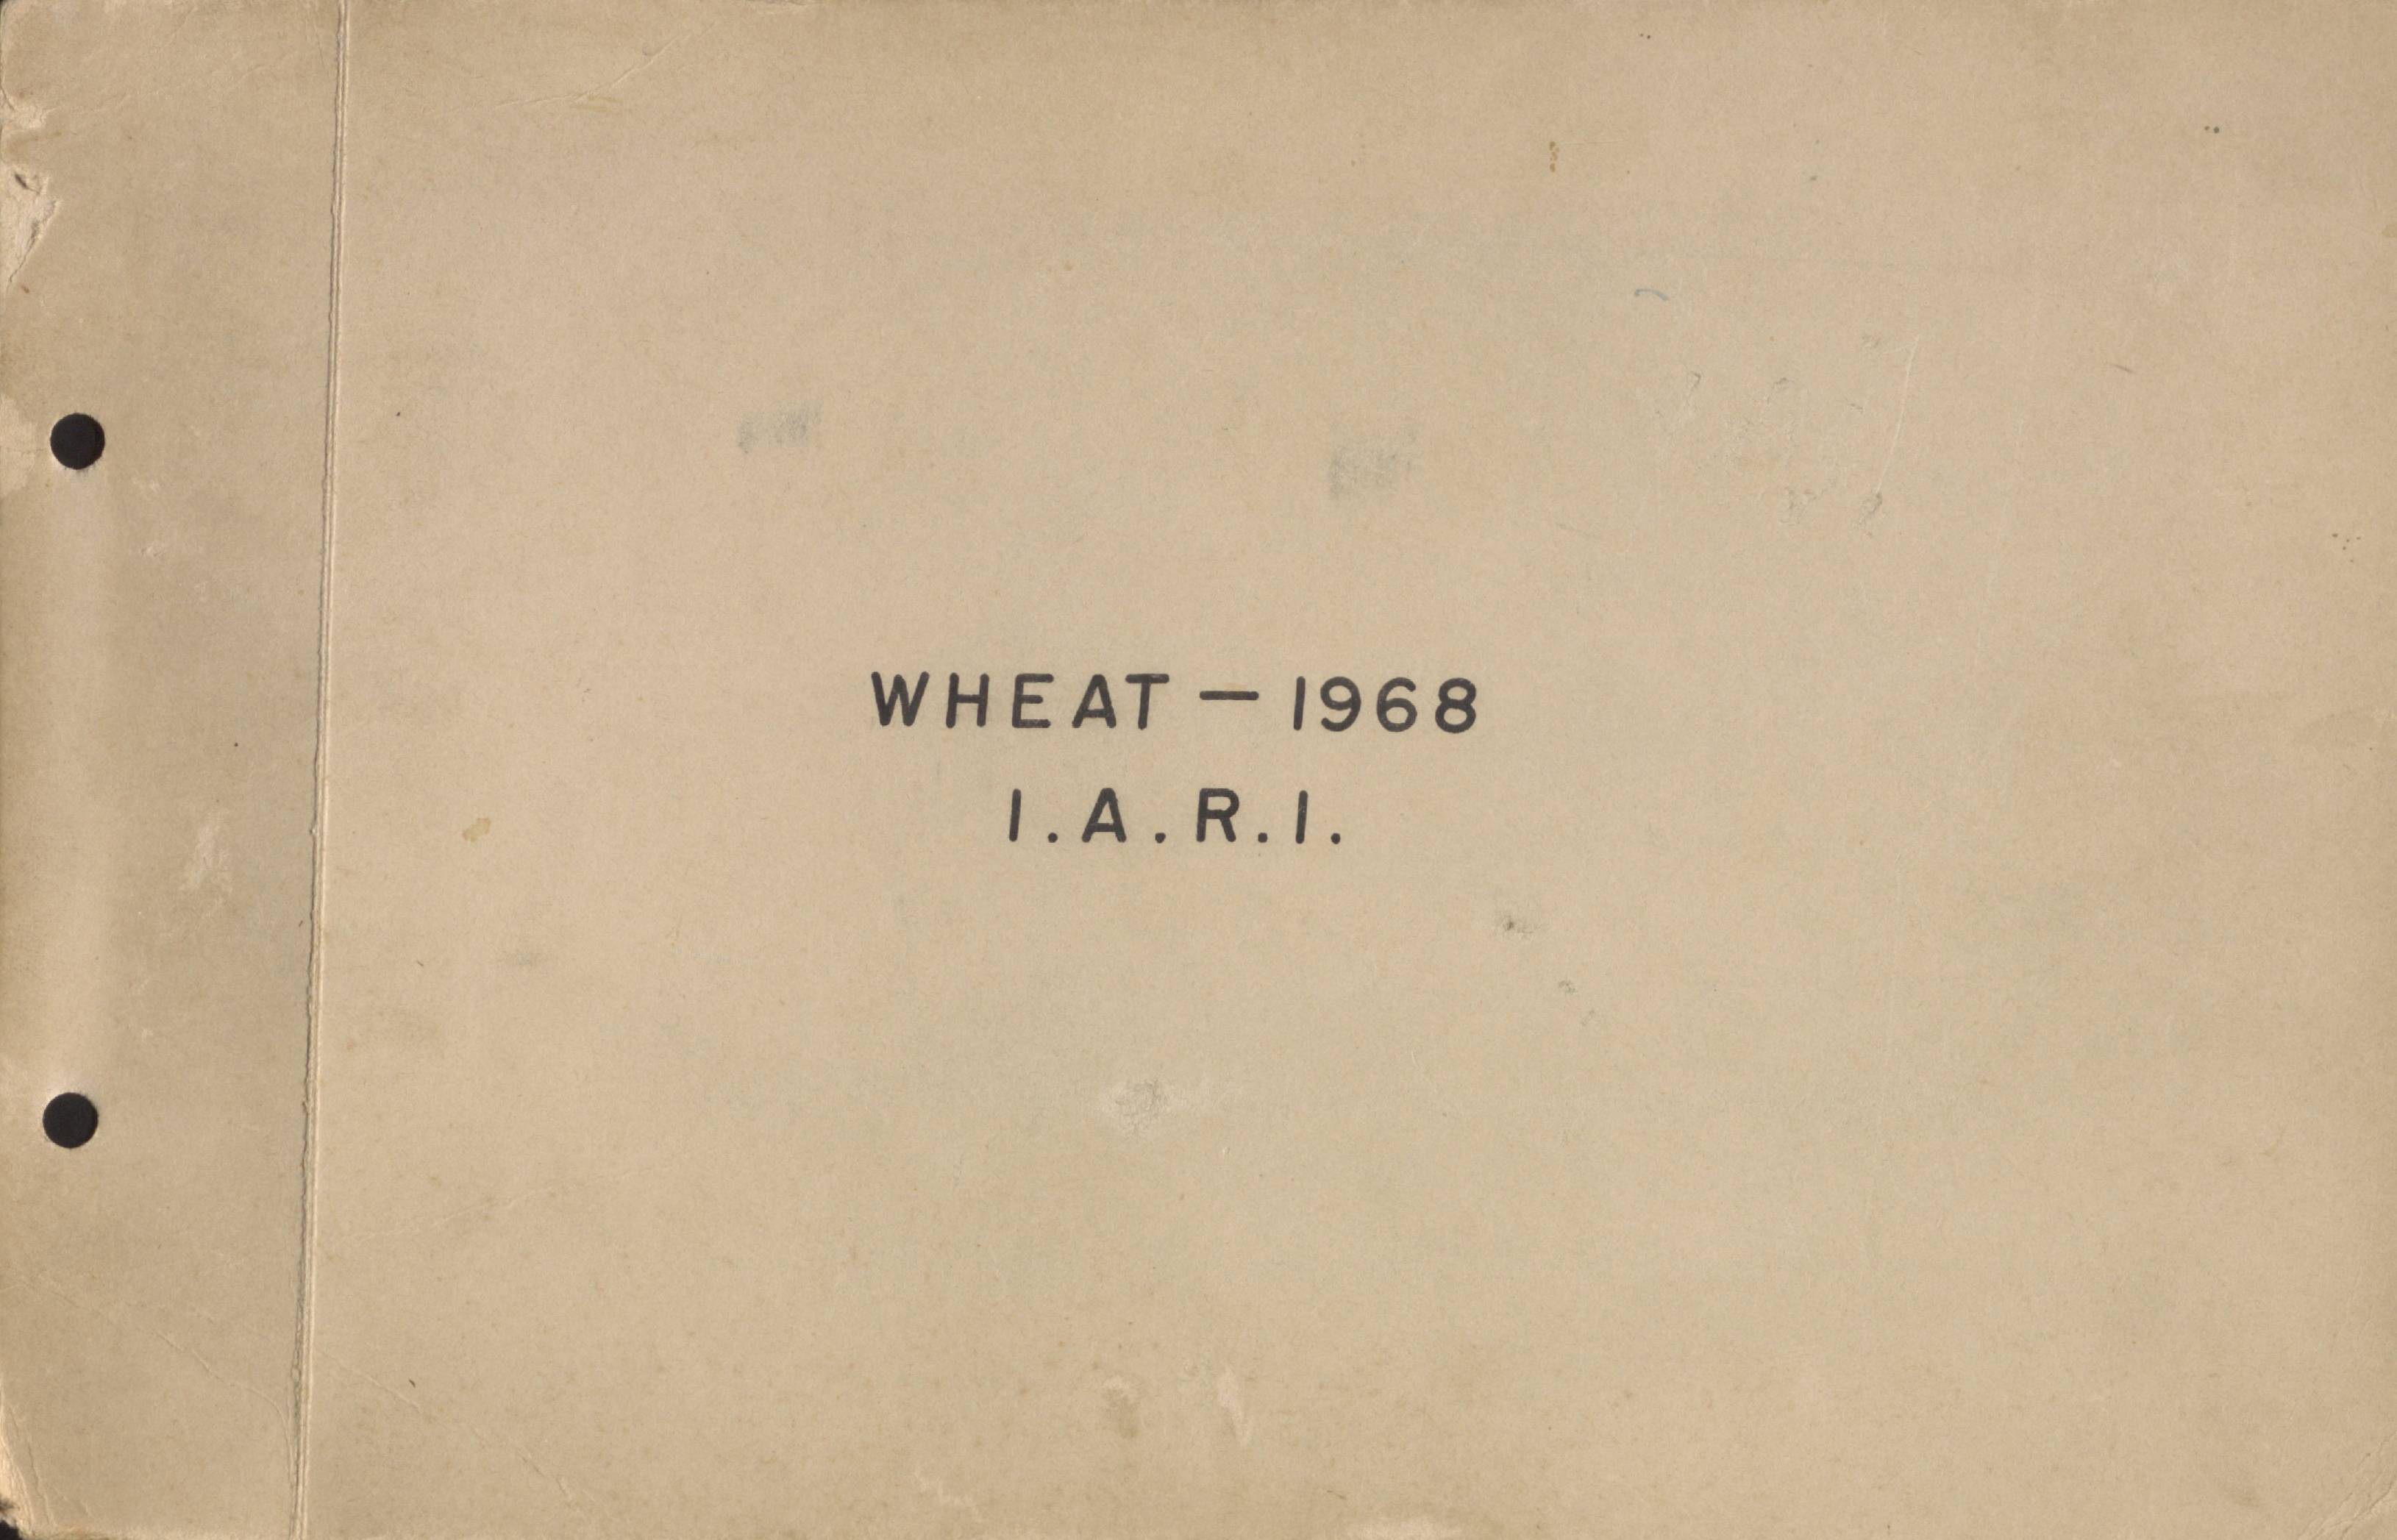 Photographs of Wheat Variety - Indian Agricultural Research Institute (IARI)